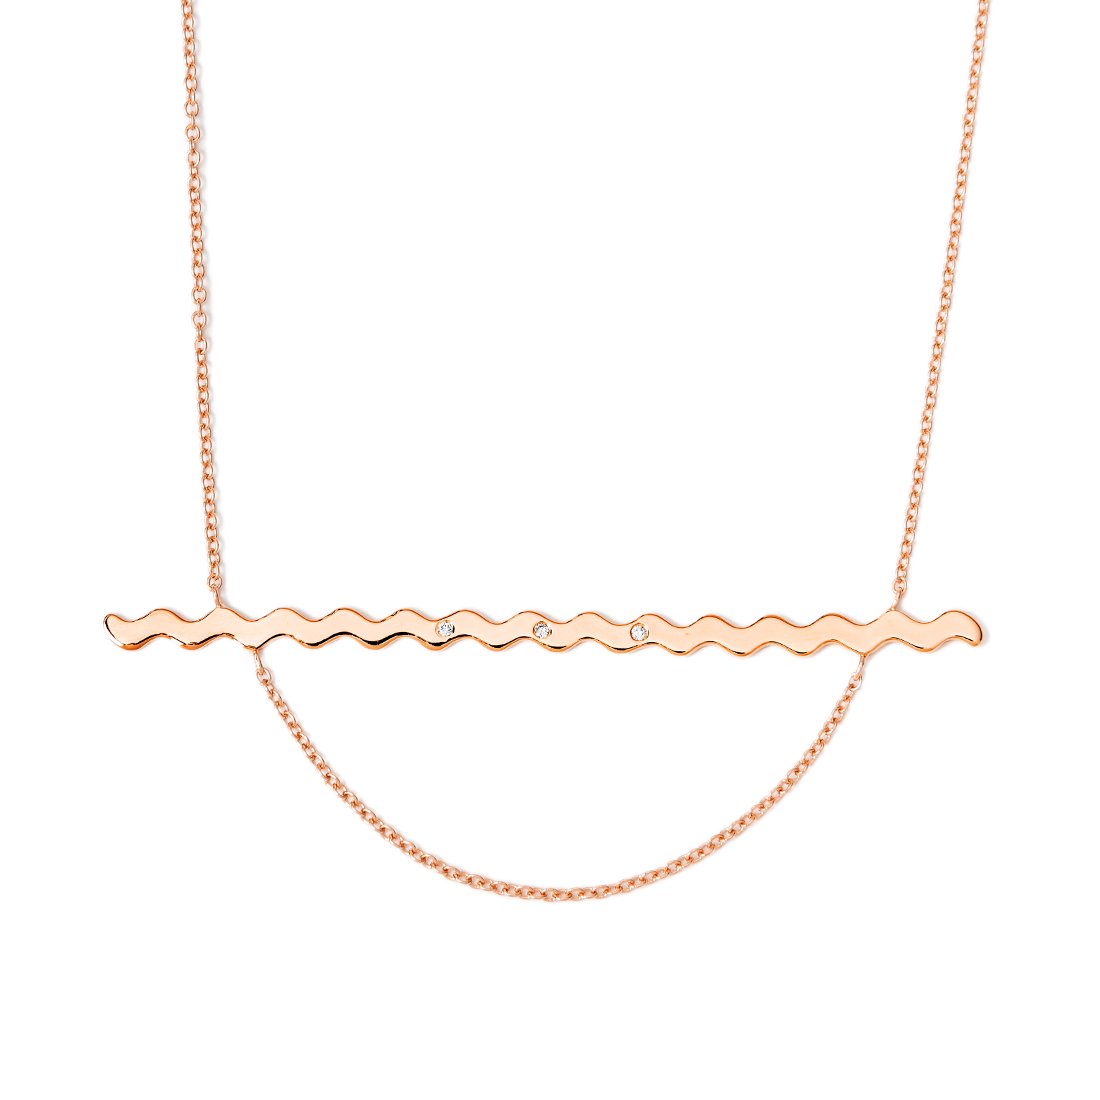 NUWL RIPPLE NECKLACE PINKGOLD